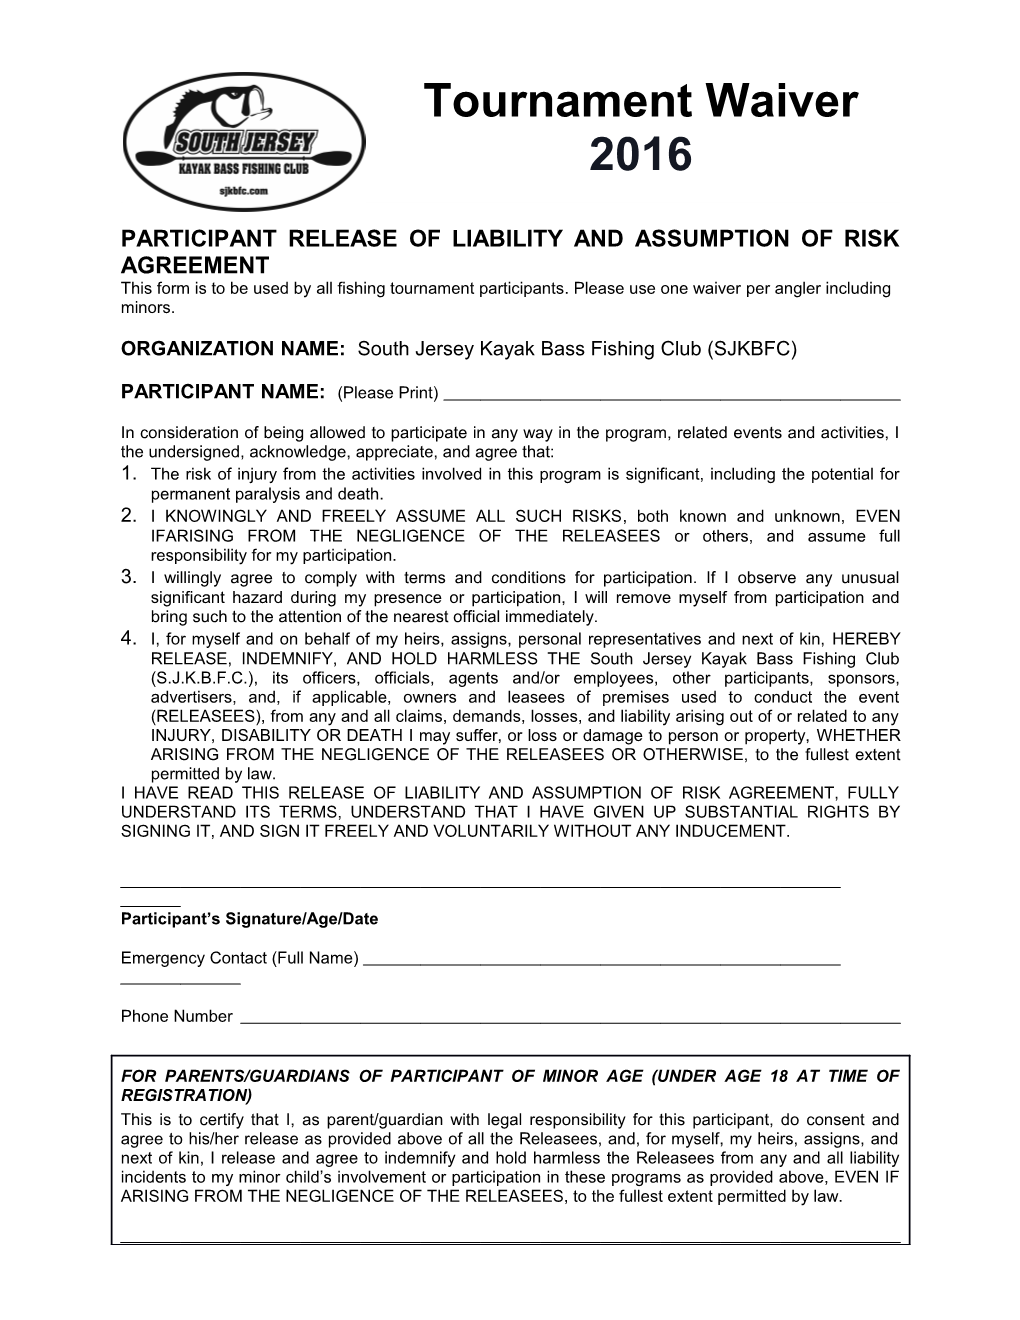 Participant Release of Liability and Assumption of Risk Agreement